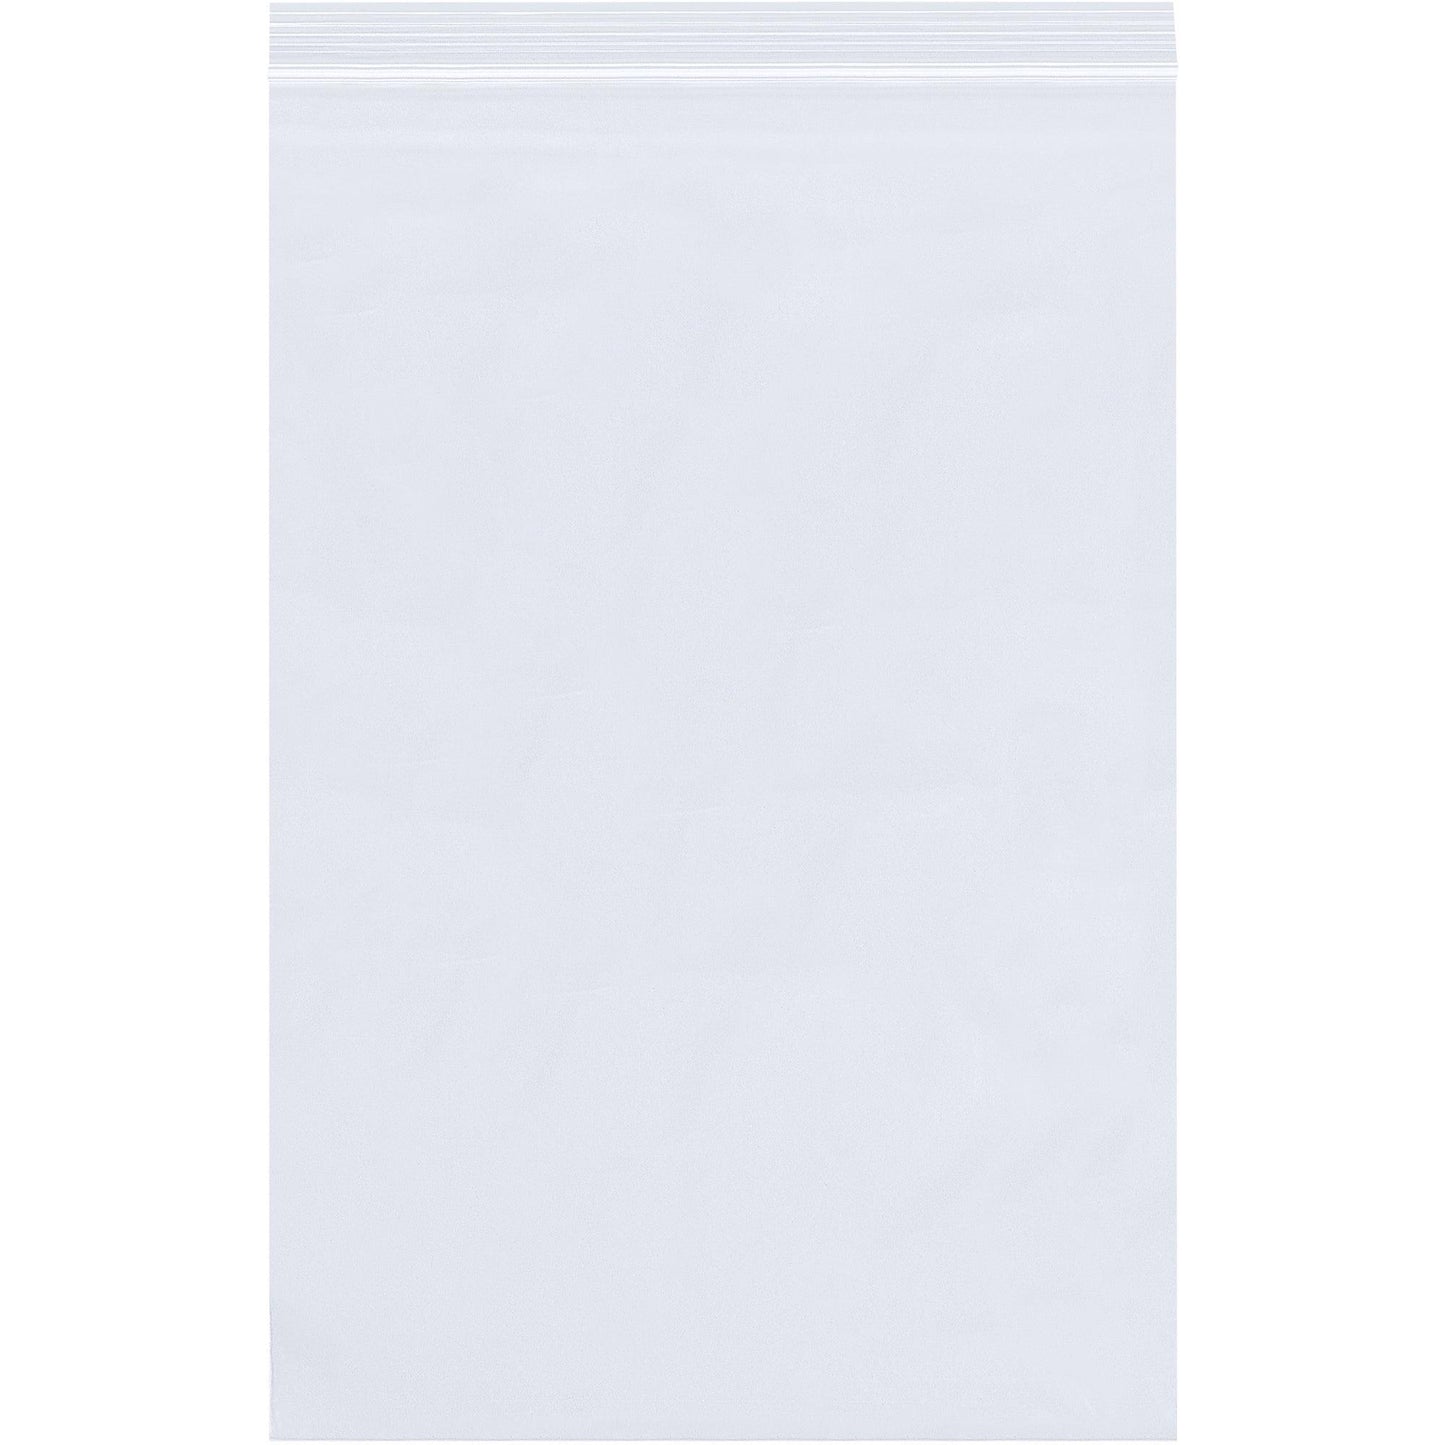 4 x 6" - 8 Mil Reclosable Poly Bags - PB3911